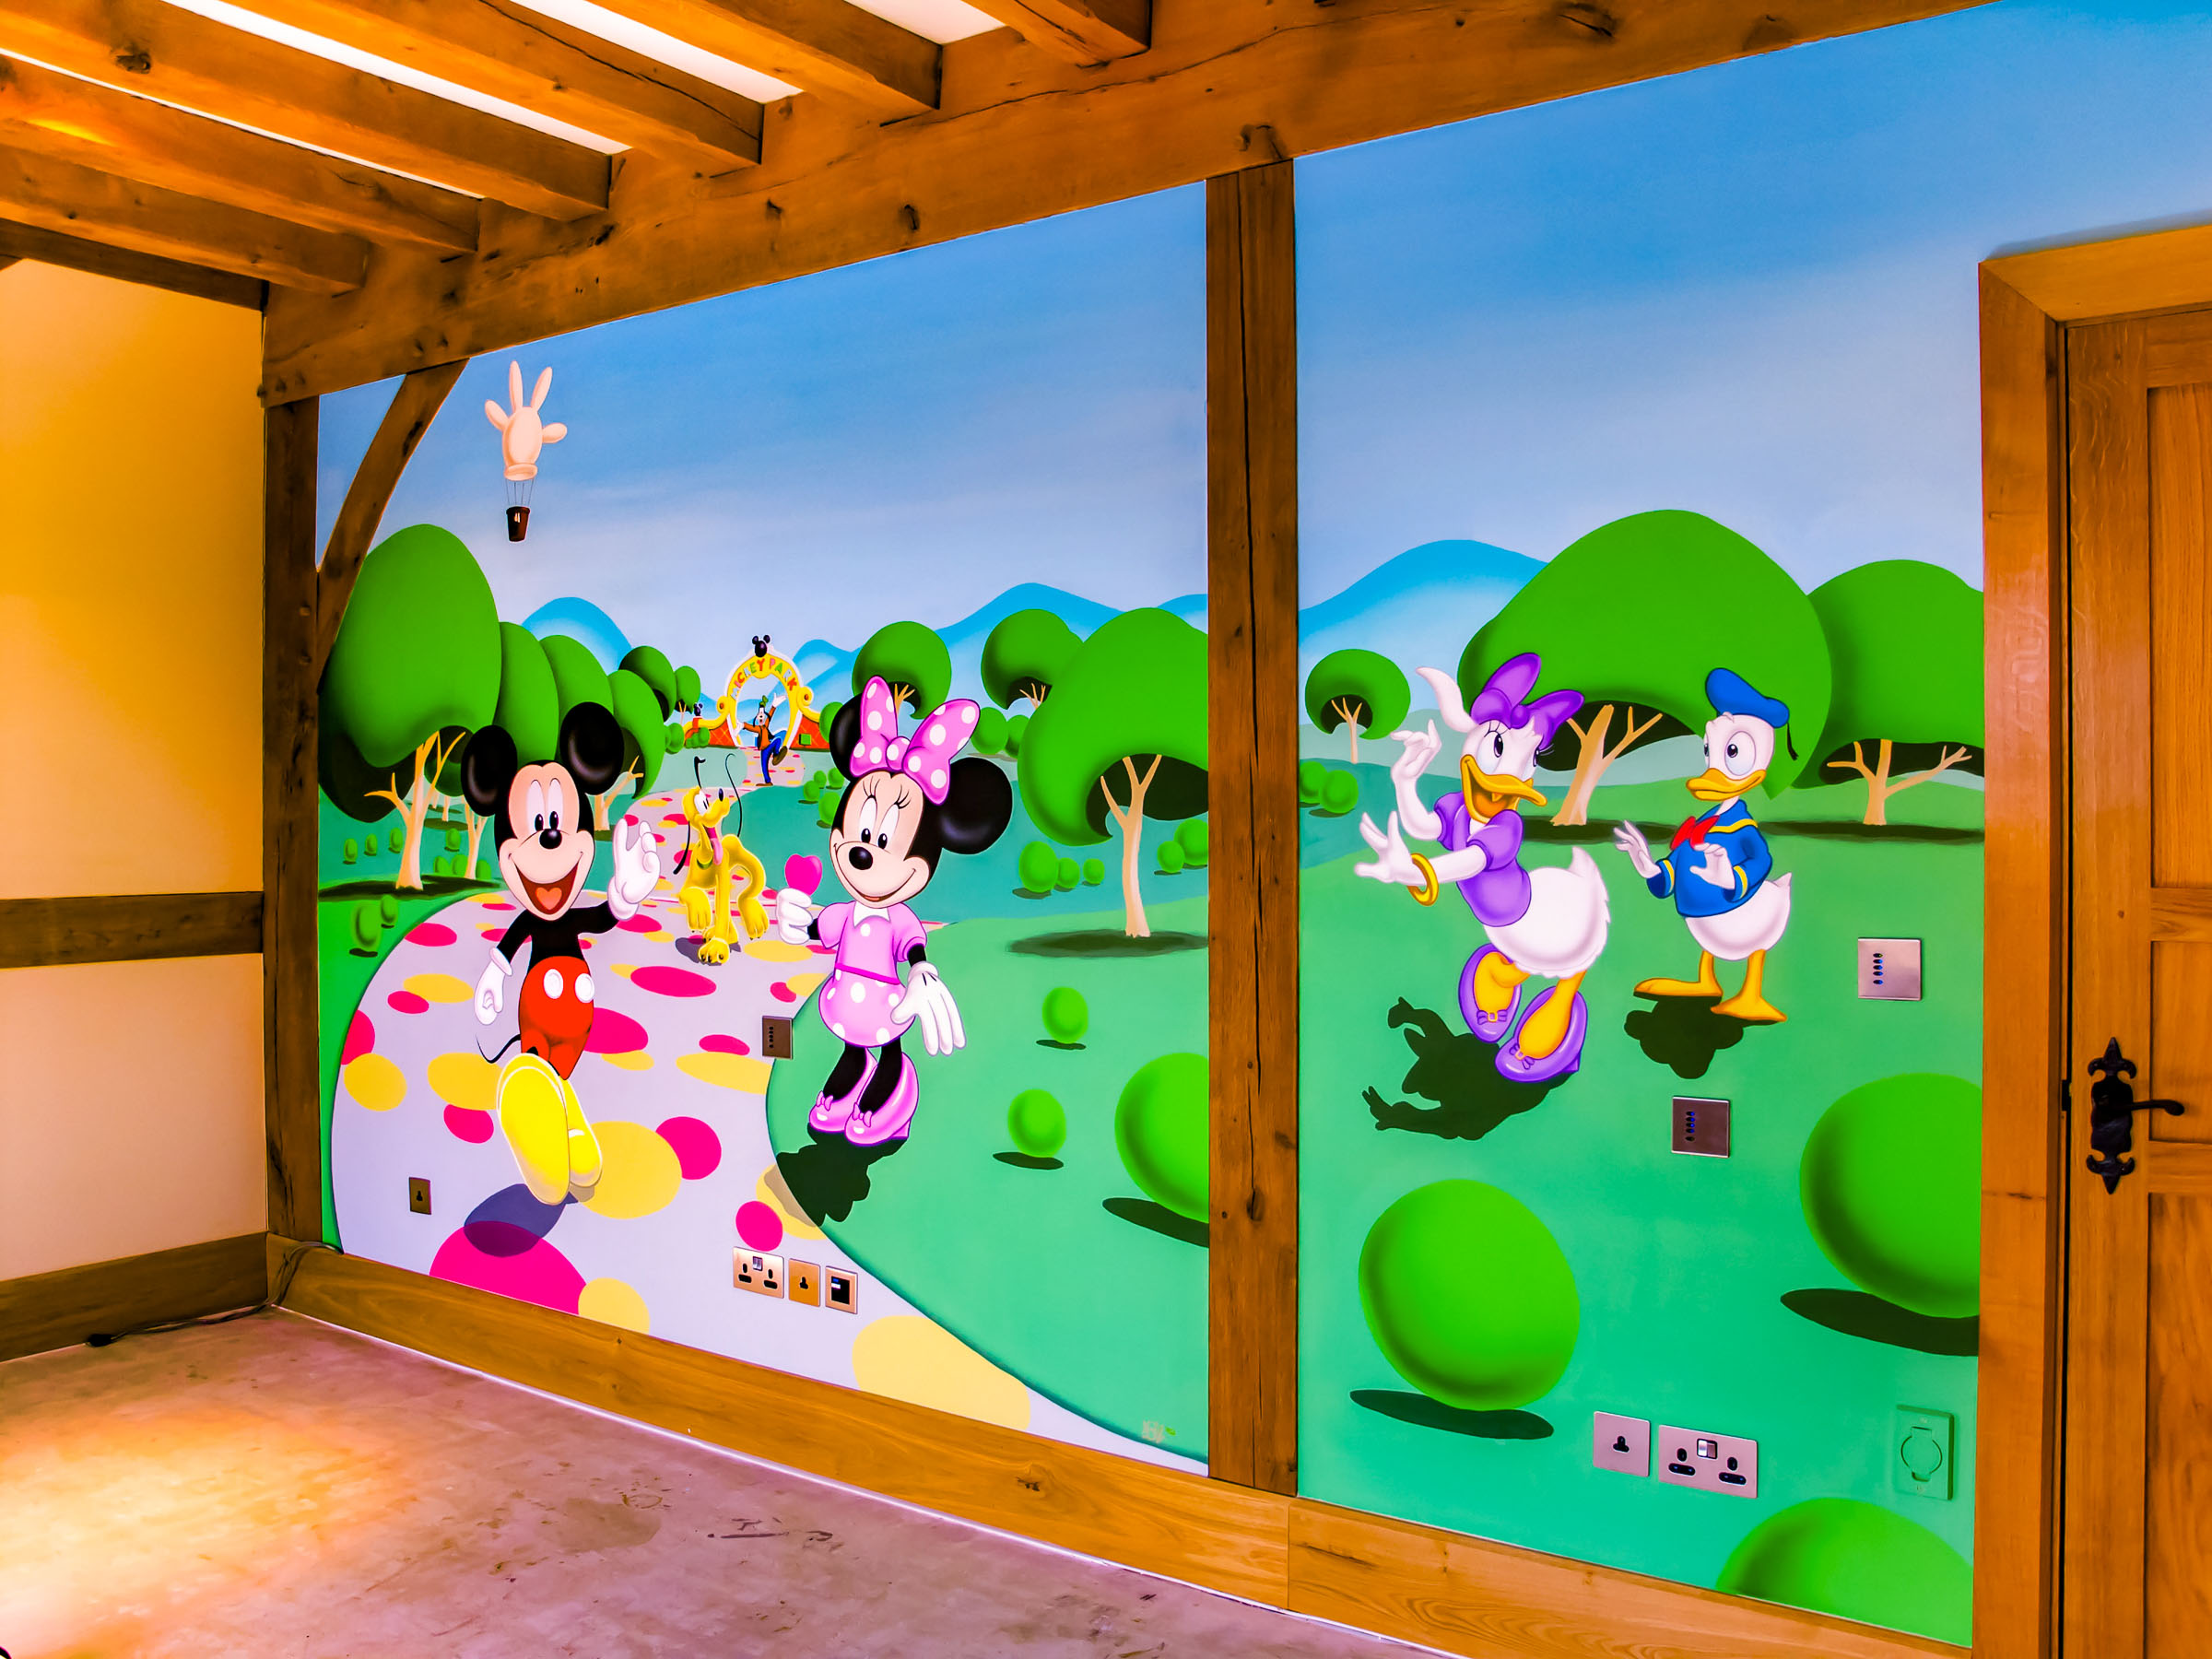 Mickey's Clubhouse Wall Mural, hand painted in girl's bedroom